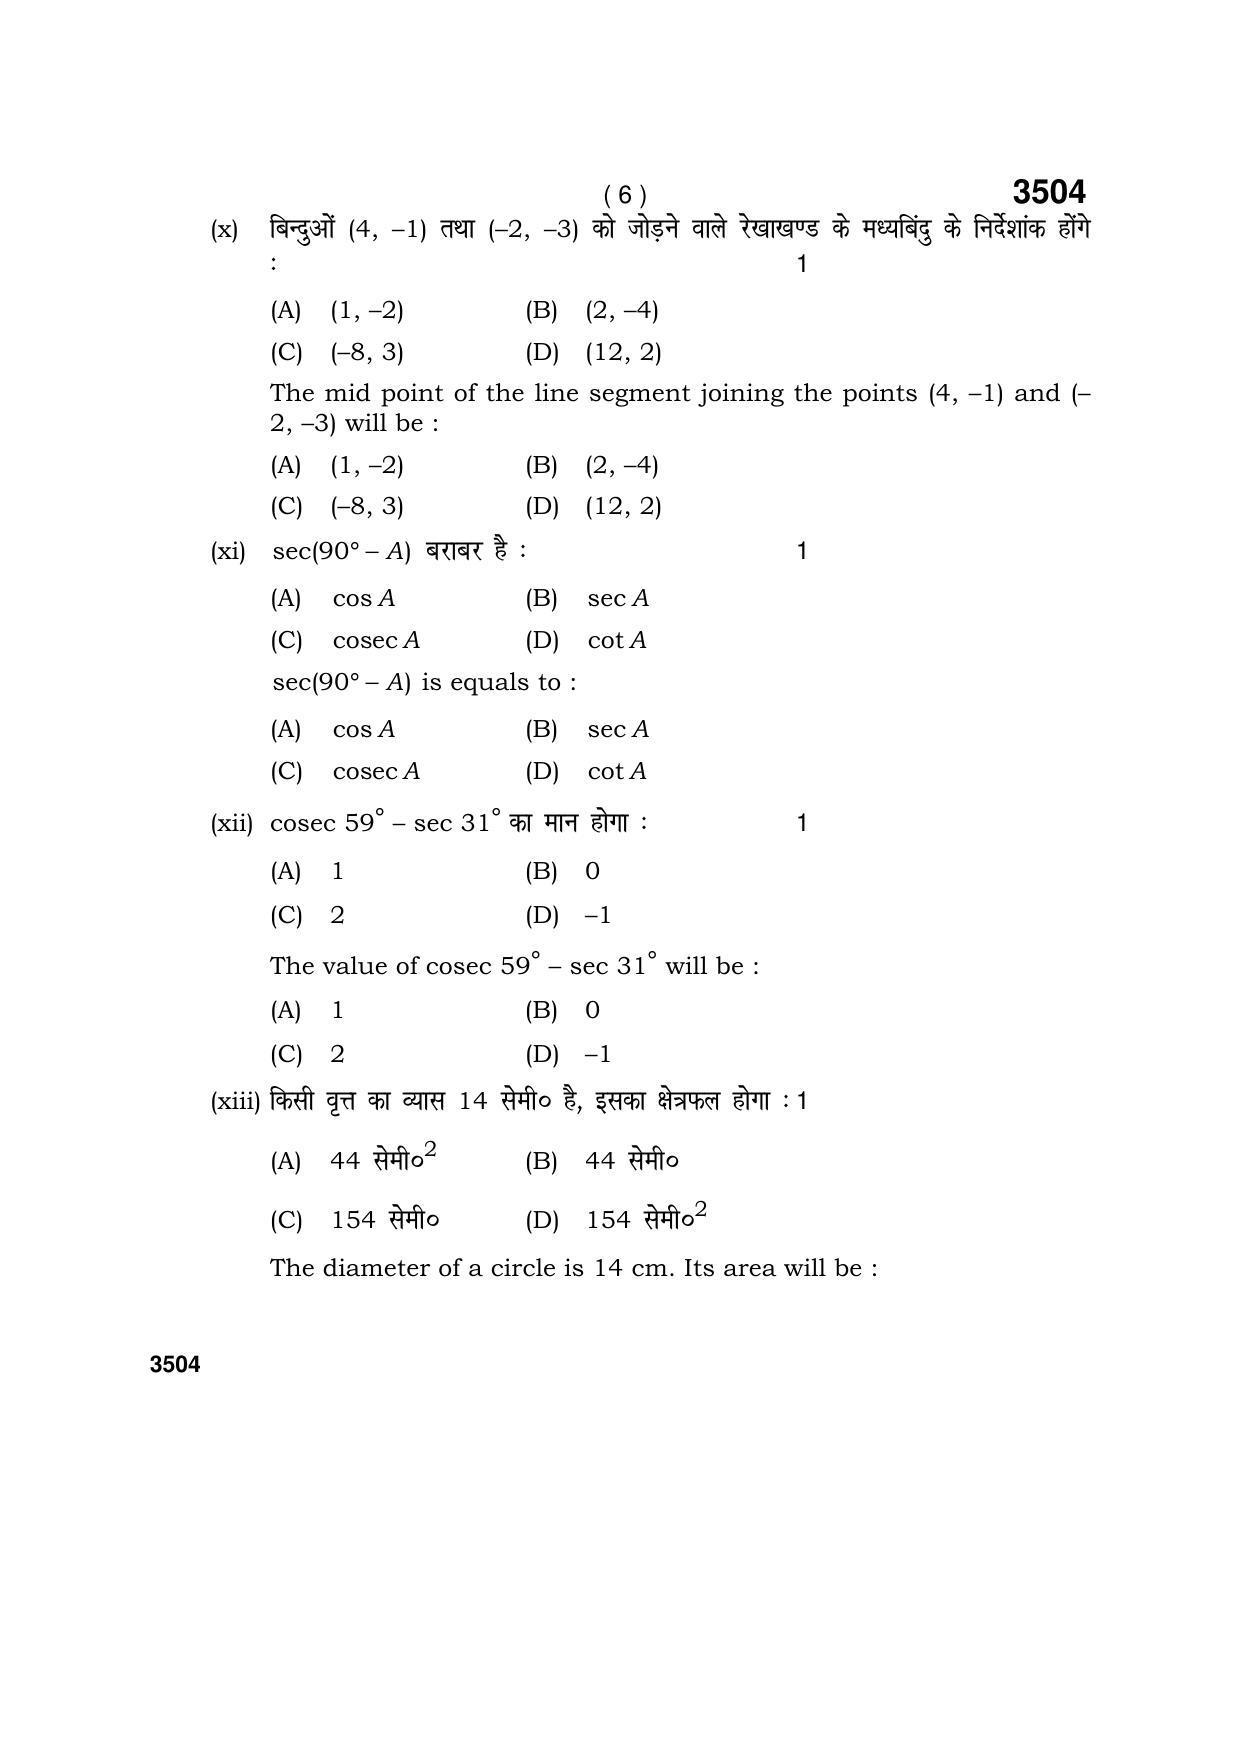 Haryana Board HBSE Class 10 Mathematics (Blind c) 2018 Question Paper - Page 6